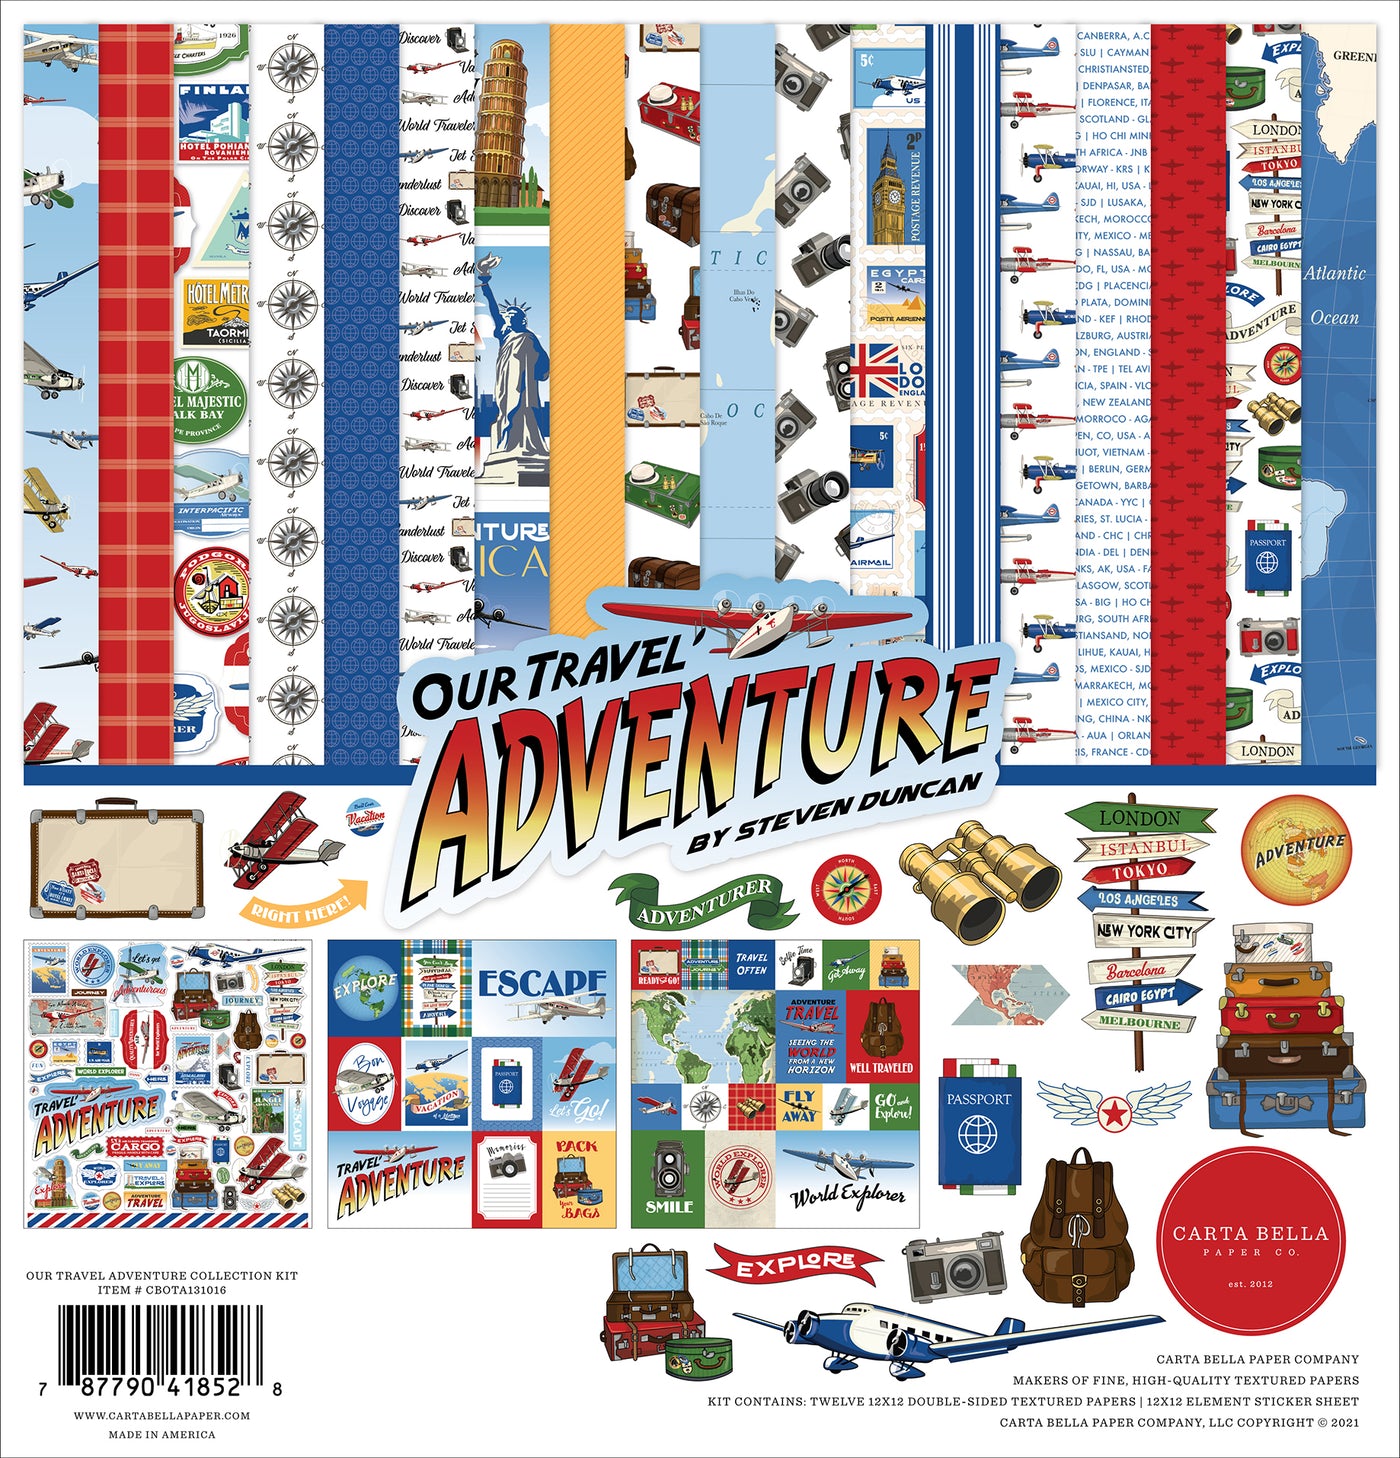 Twelve double-sided designer sheets help showcase memories of international travel and vacations abroad. Fun imagery to scrap travel adventures. 12x12 inch cardstock.